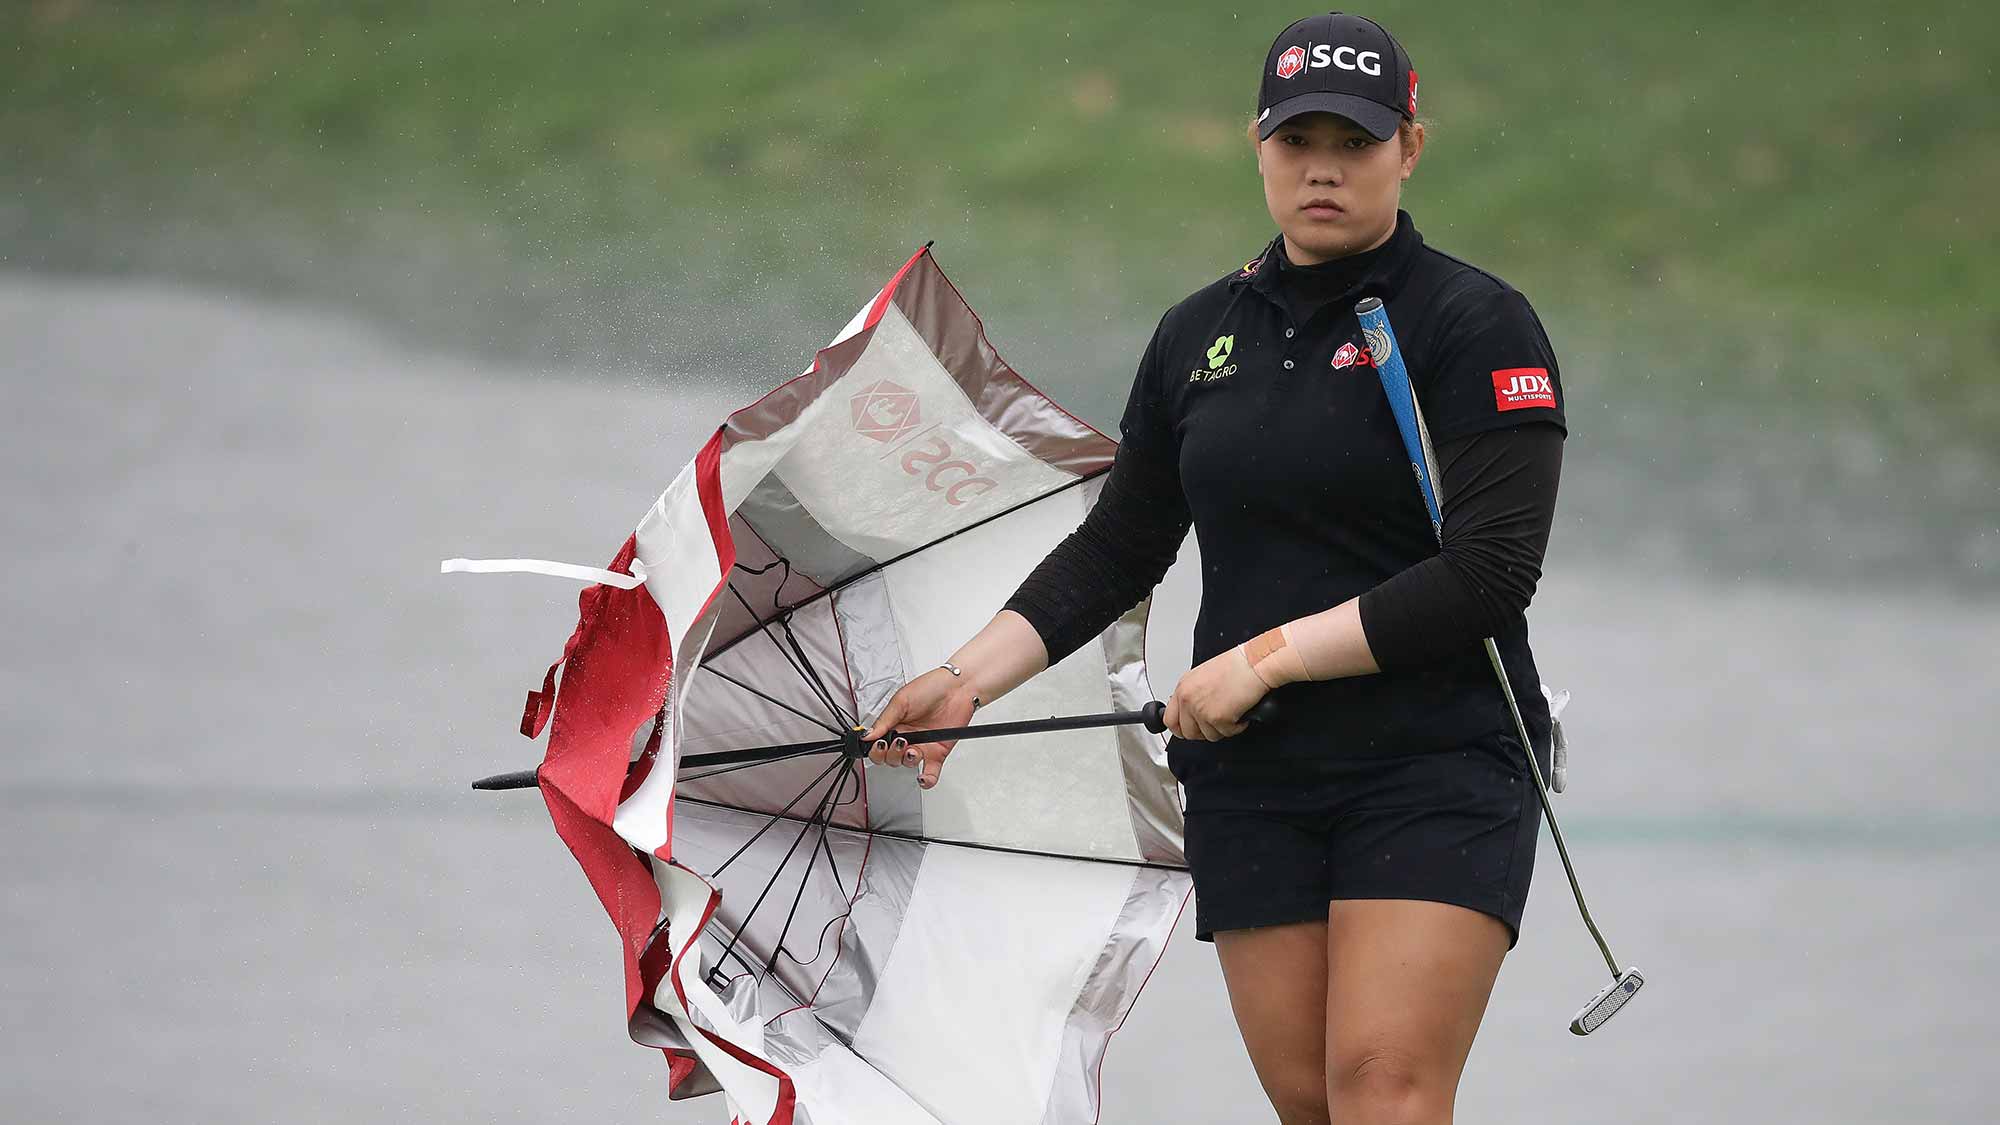 Ariya Jutanugarn of Thailand wear black clothing to mourn the death of King Bhumibol on the 18th green during the final round of the LPGA KEB-Hana Bank Championship at the Sky 72 Golf Club Ocean Course